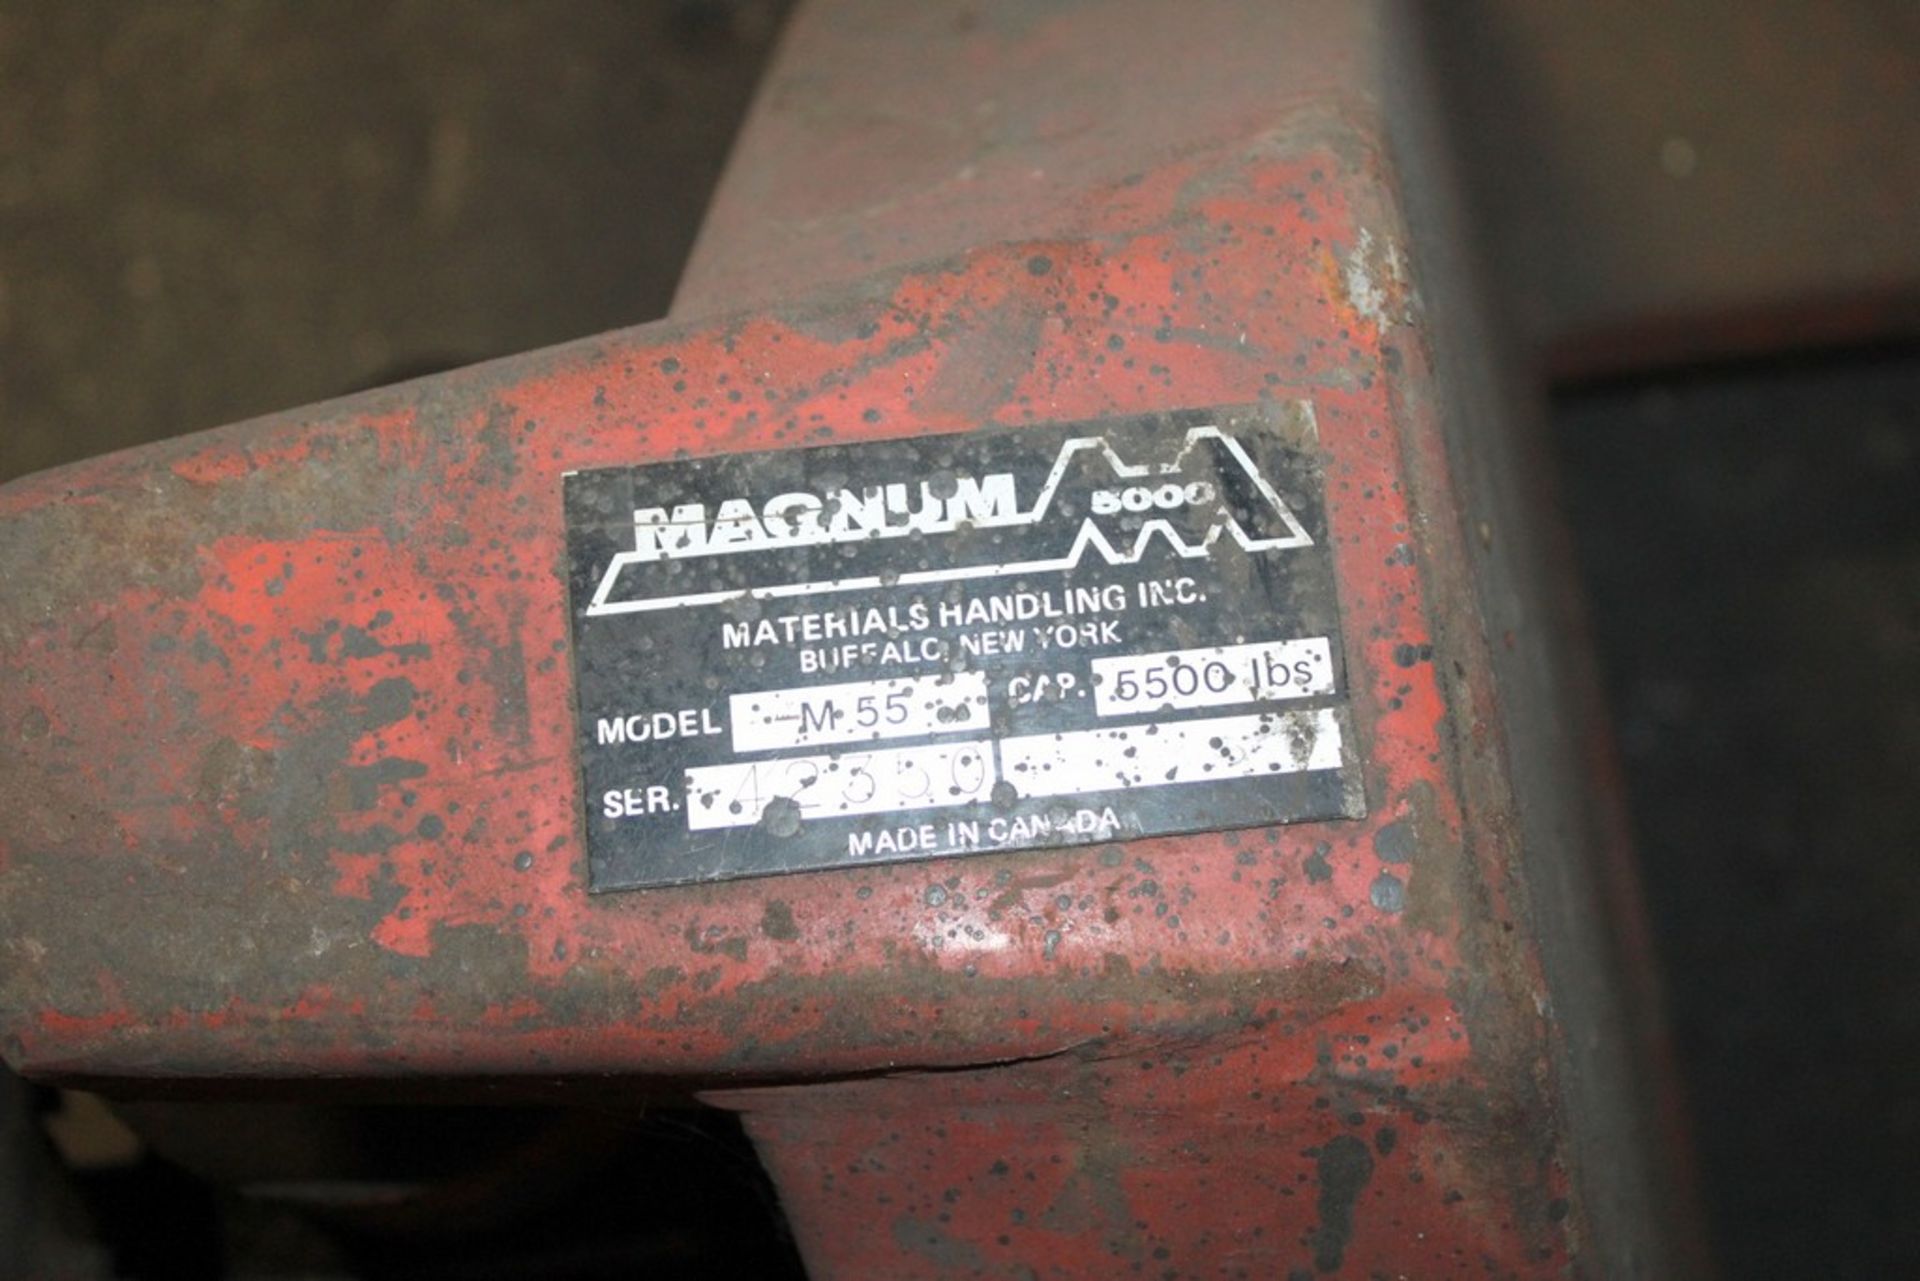 Magnum Model M55 Hydraulic Pallet Jack - 5500 Lbs Capacity - 48" x 7" Width Forks - Image 2 of 2